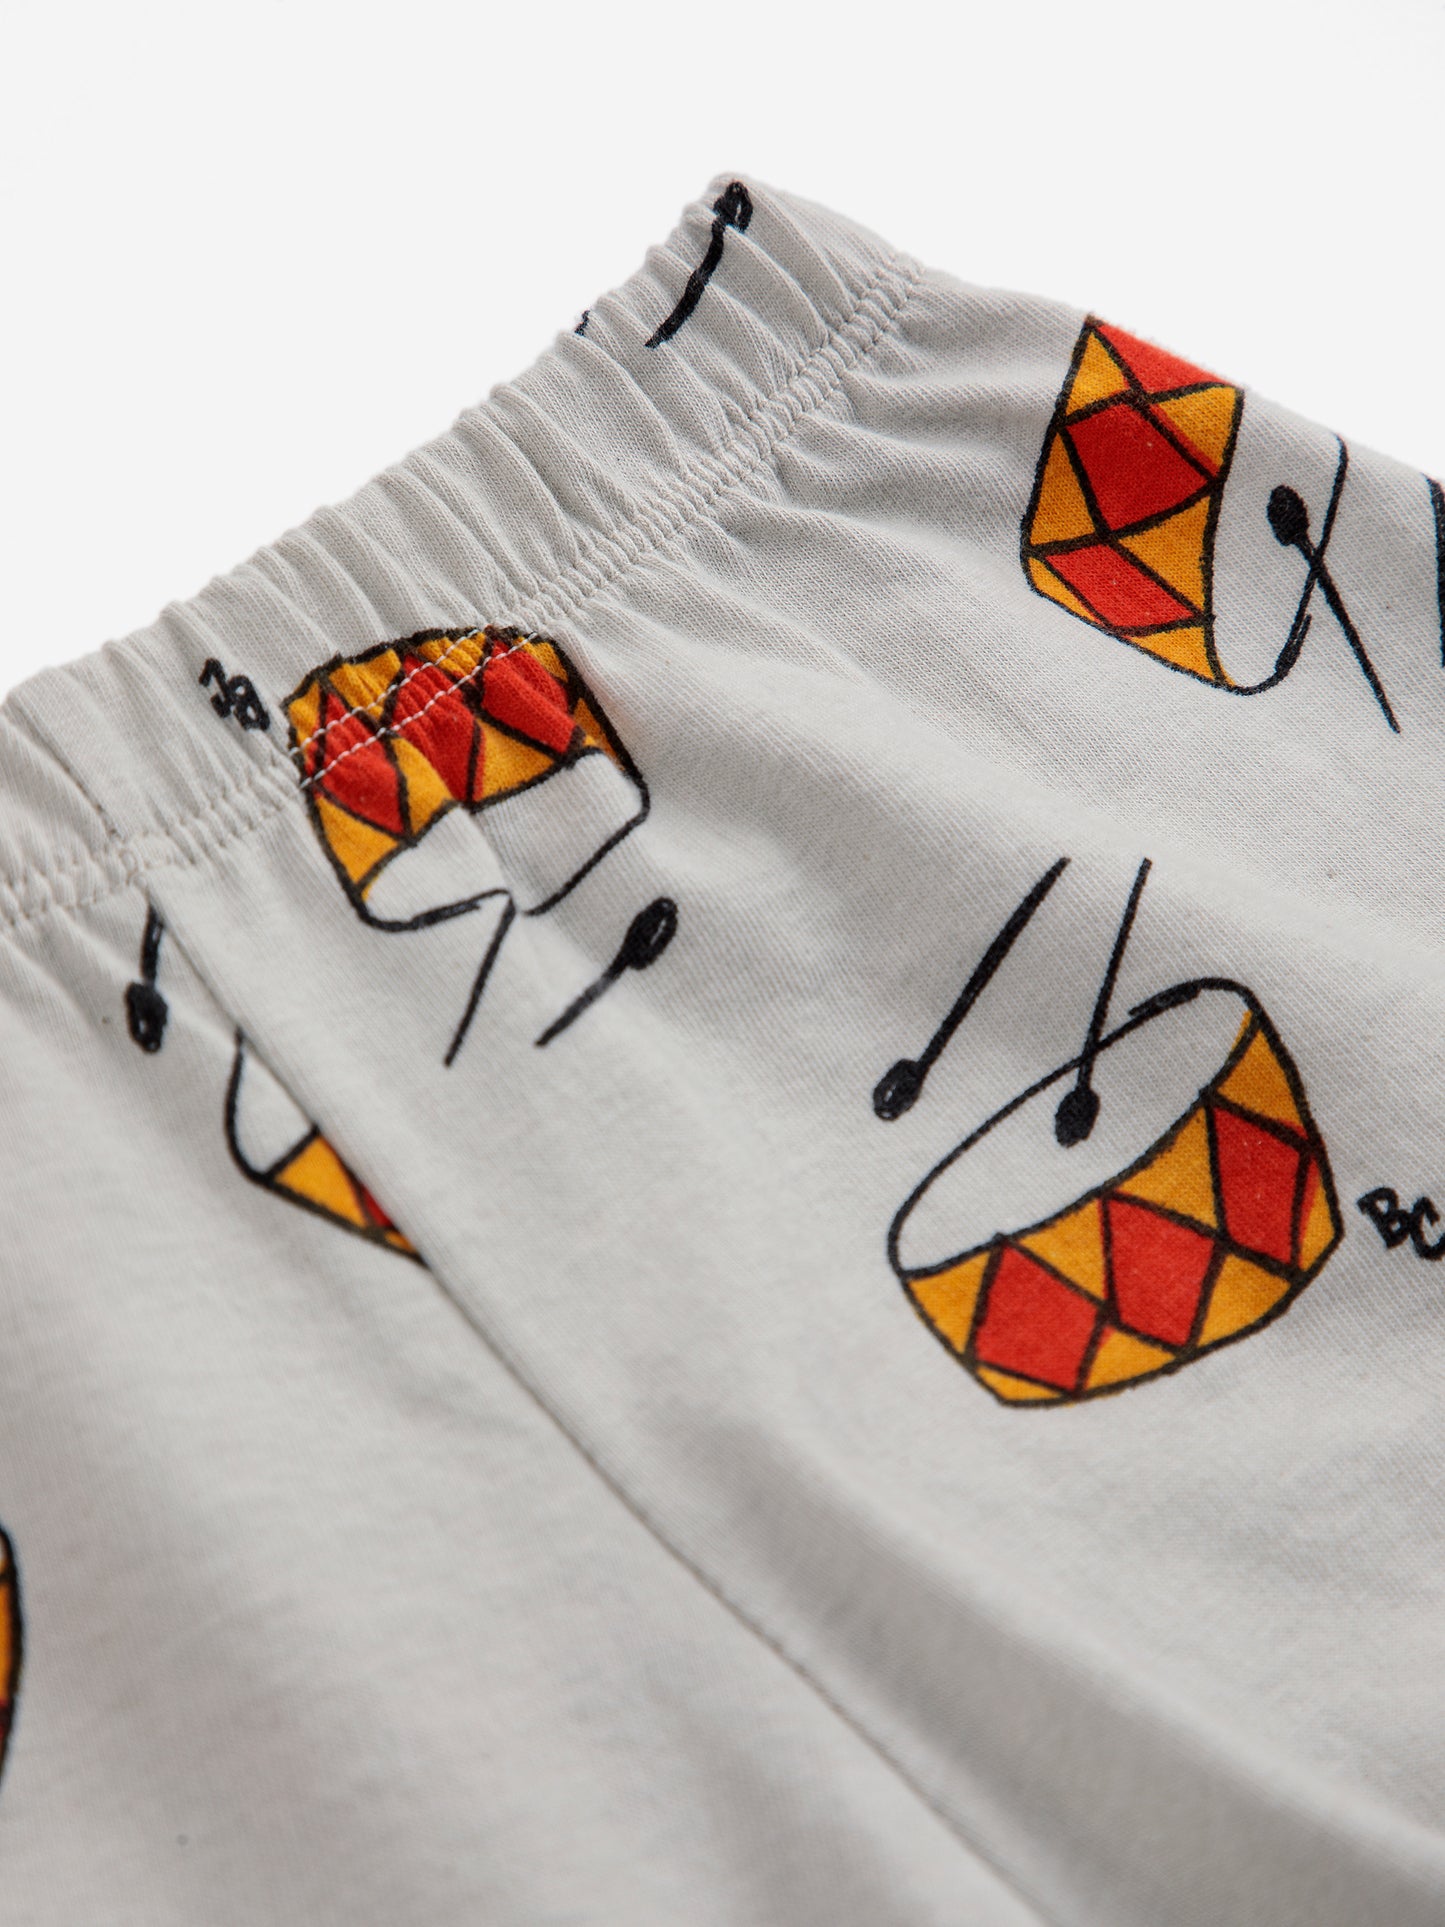 Baby Play the Drum Shorts